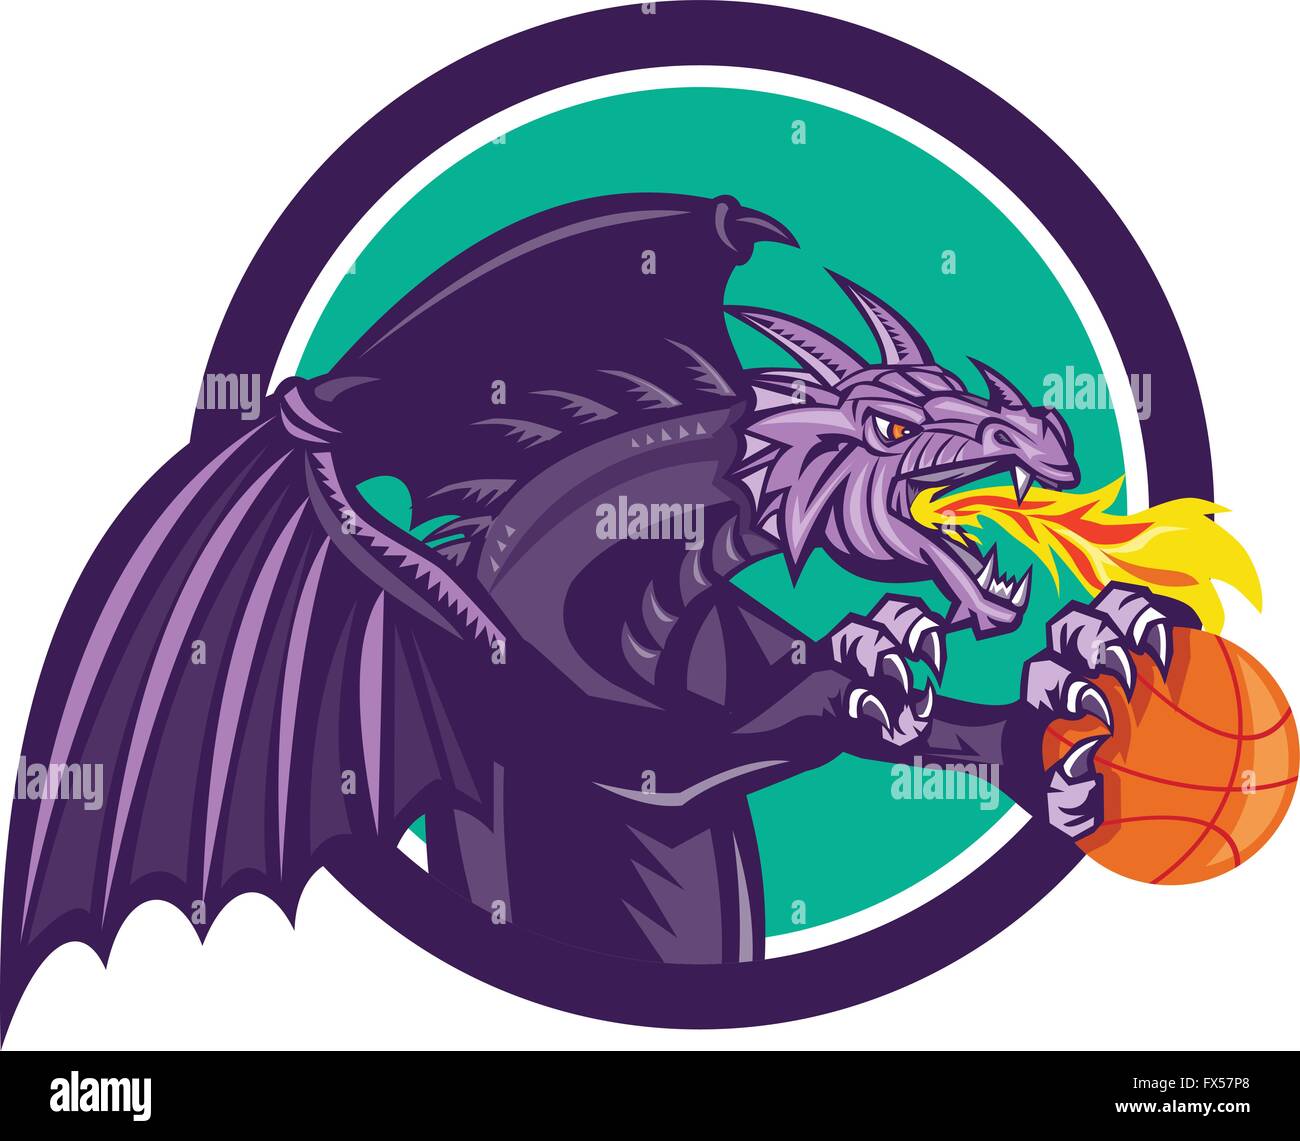 Illustration of a purple dragon breathing fire clutching holding an orange basketball viewed from the side set inside circle on Stock Vector